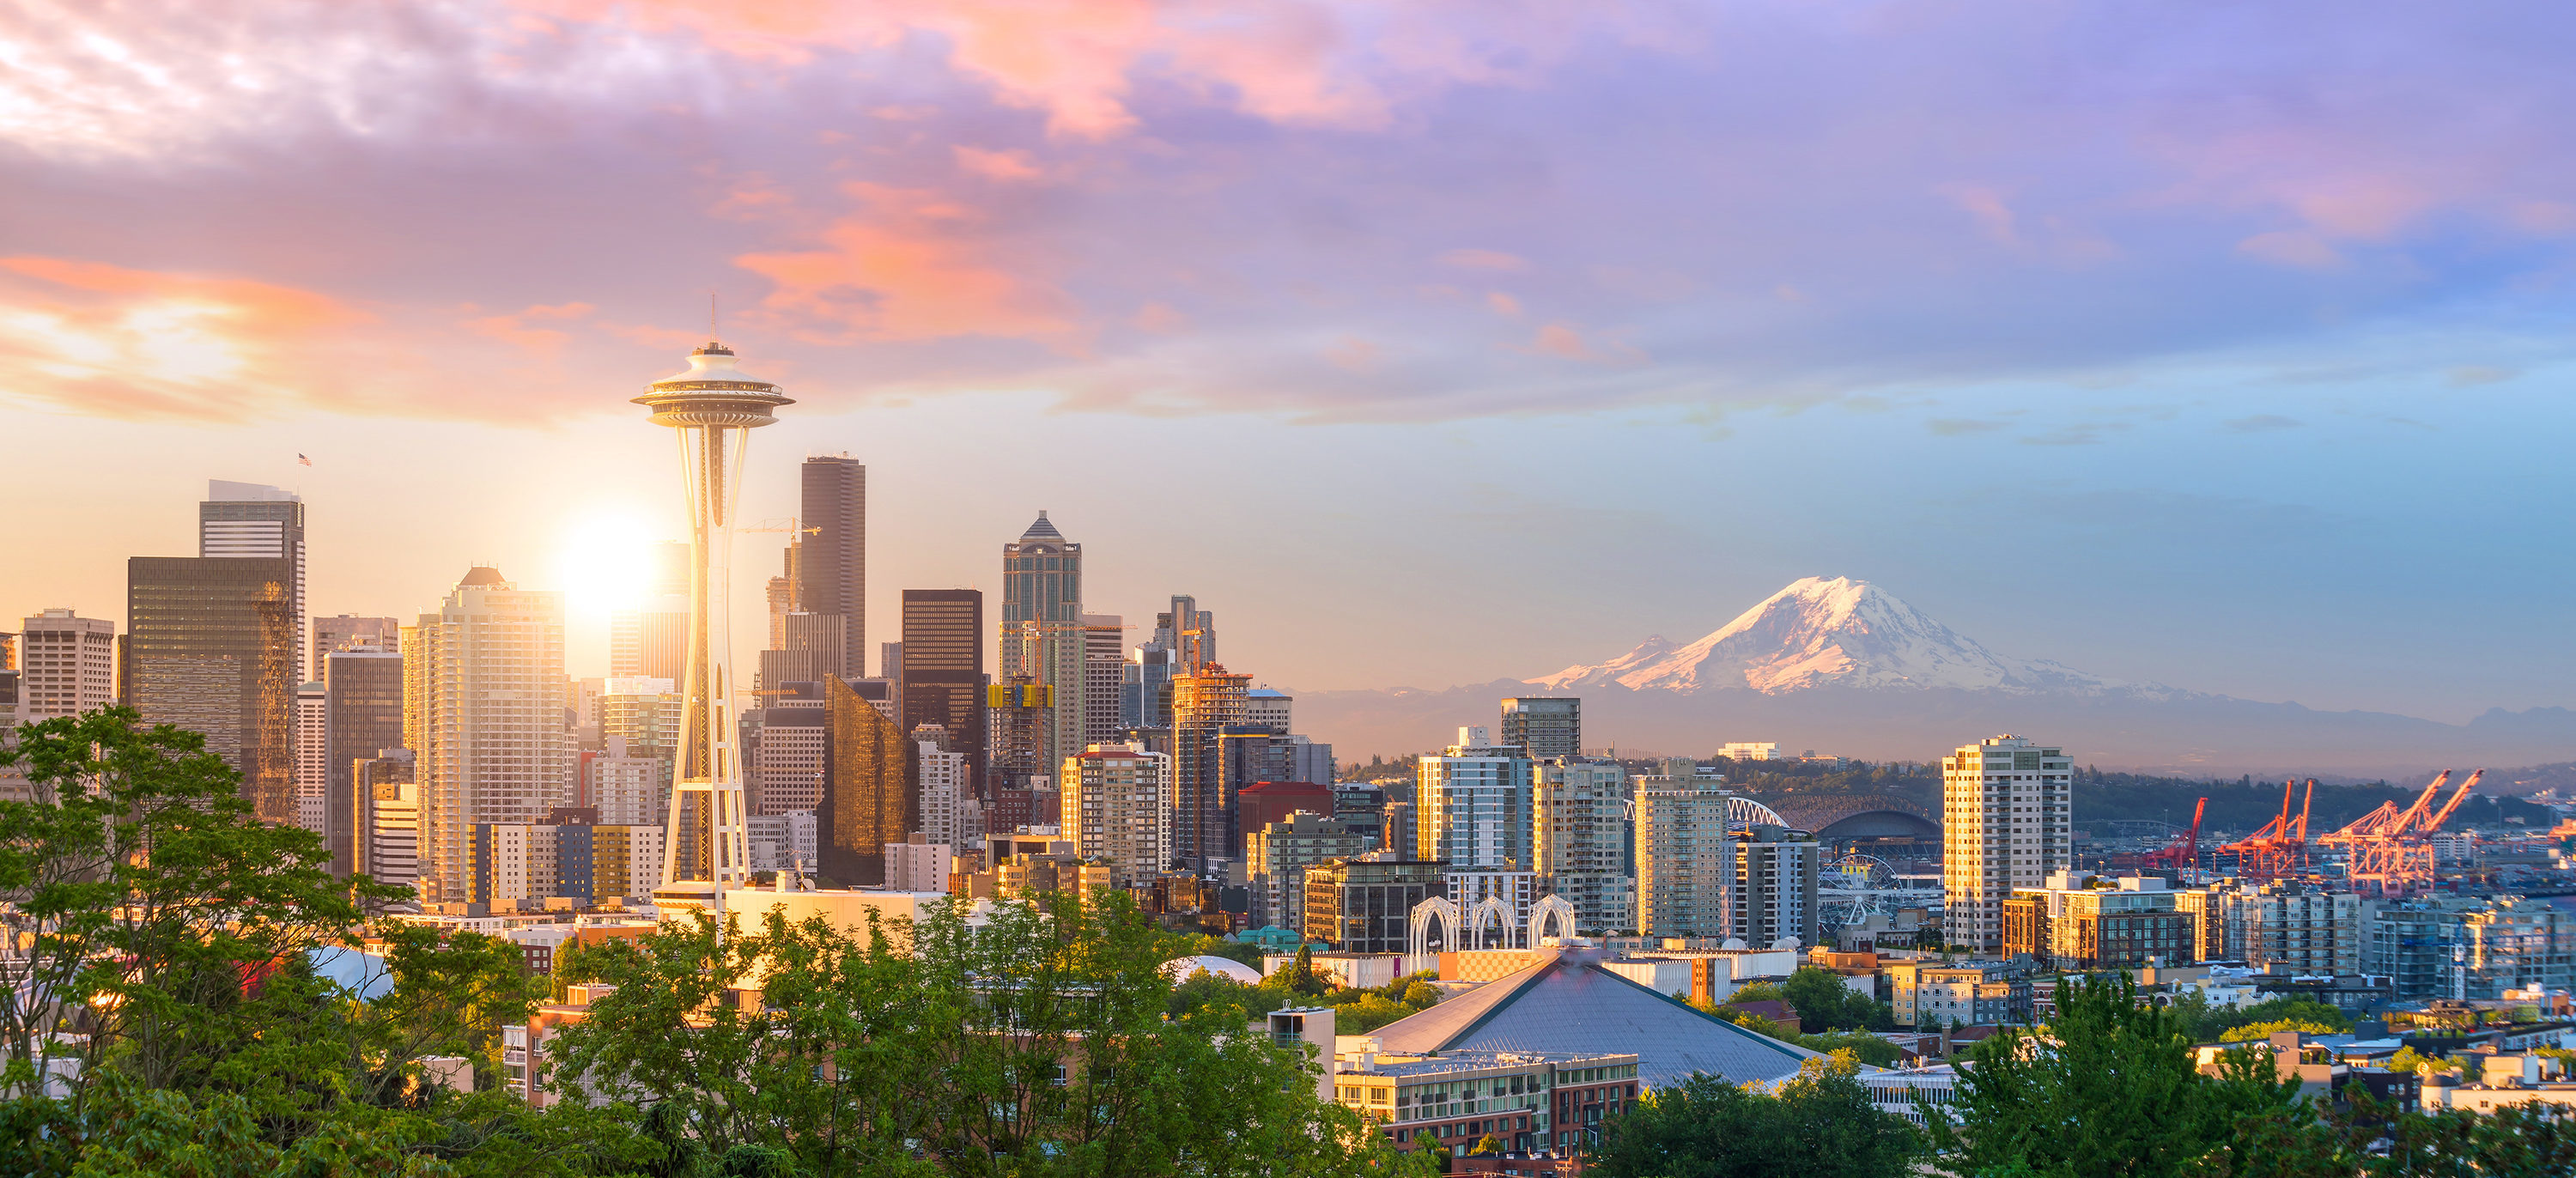 View of downtown Seattle skyline in Seattle Washington, USA - Image